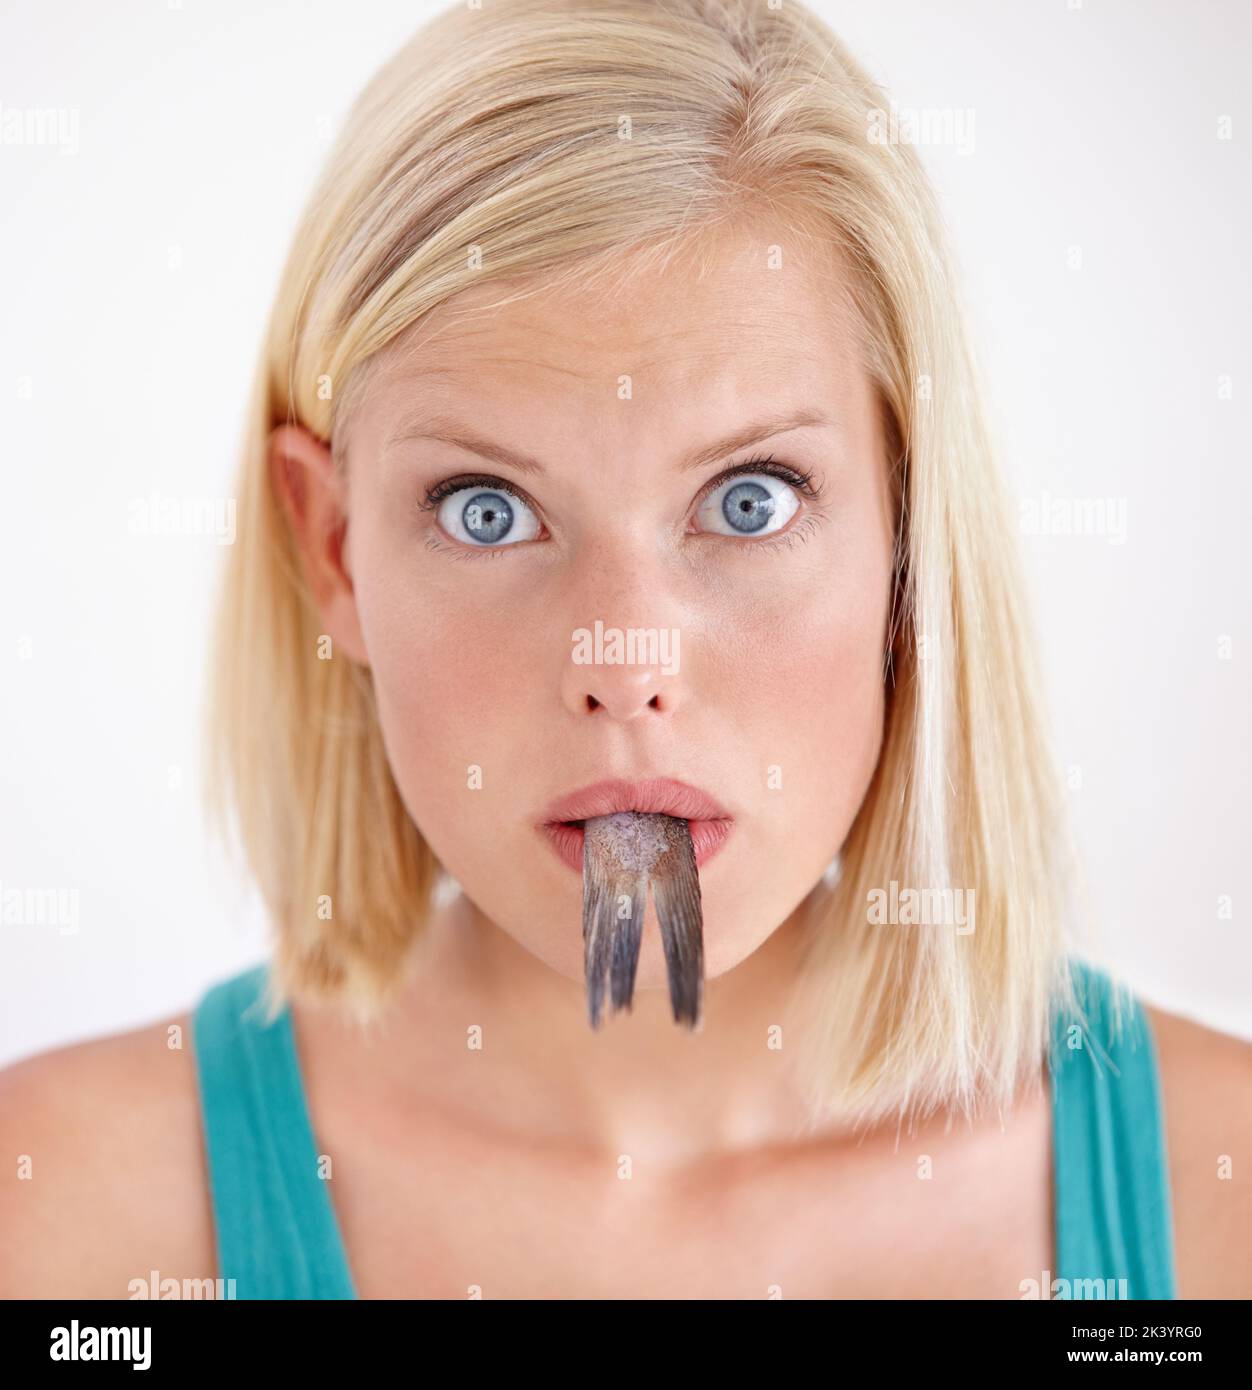 Eating a tasteless fish. Portrait of a young woman eating a whole fish. Stock Photo